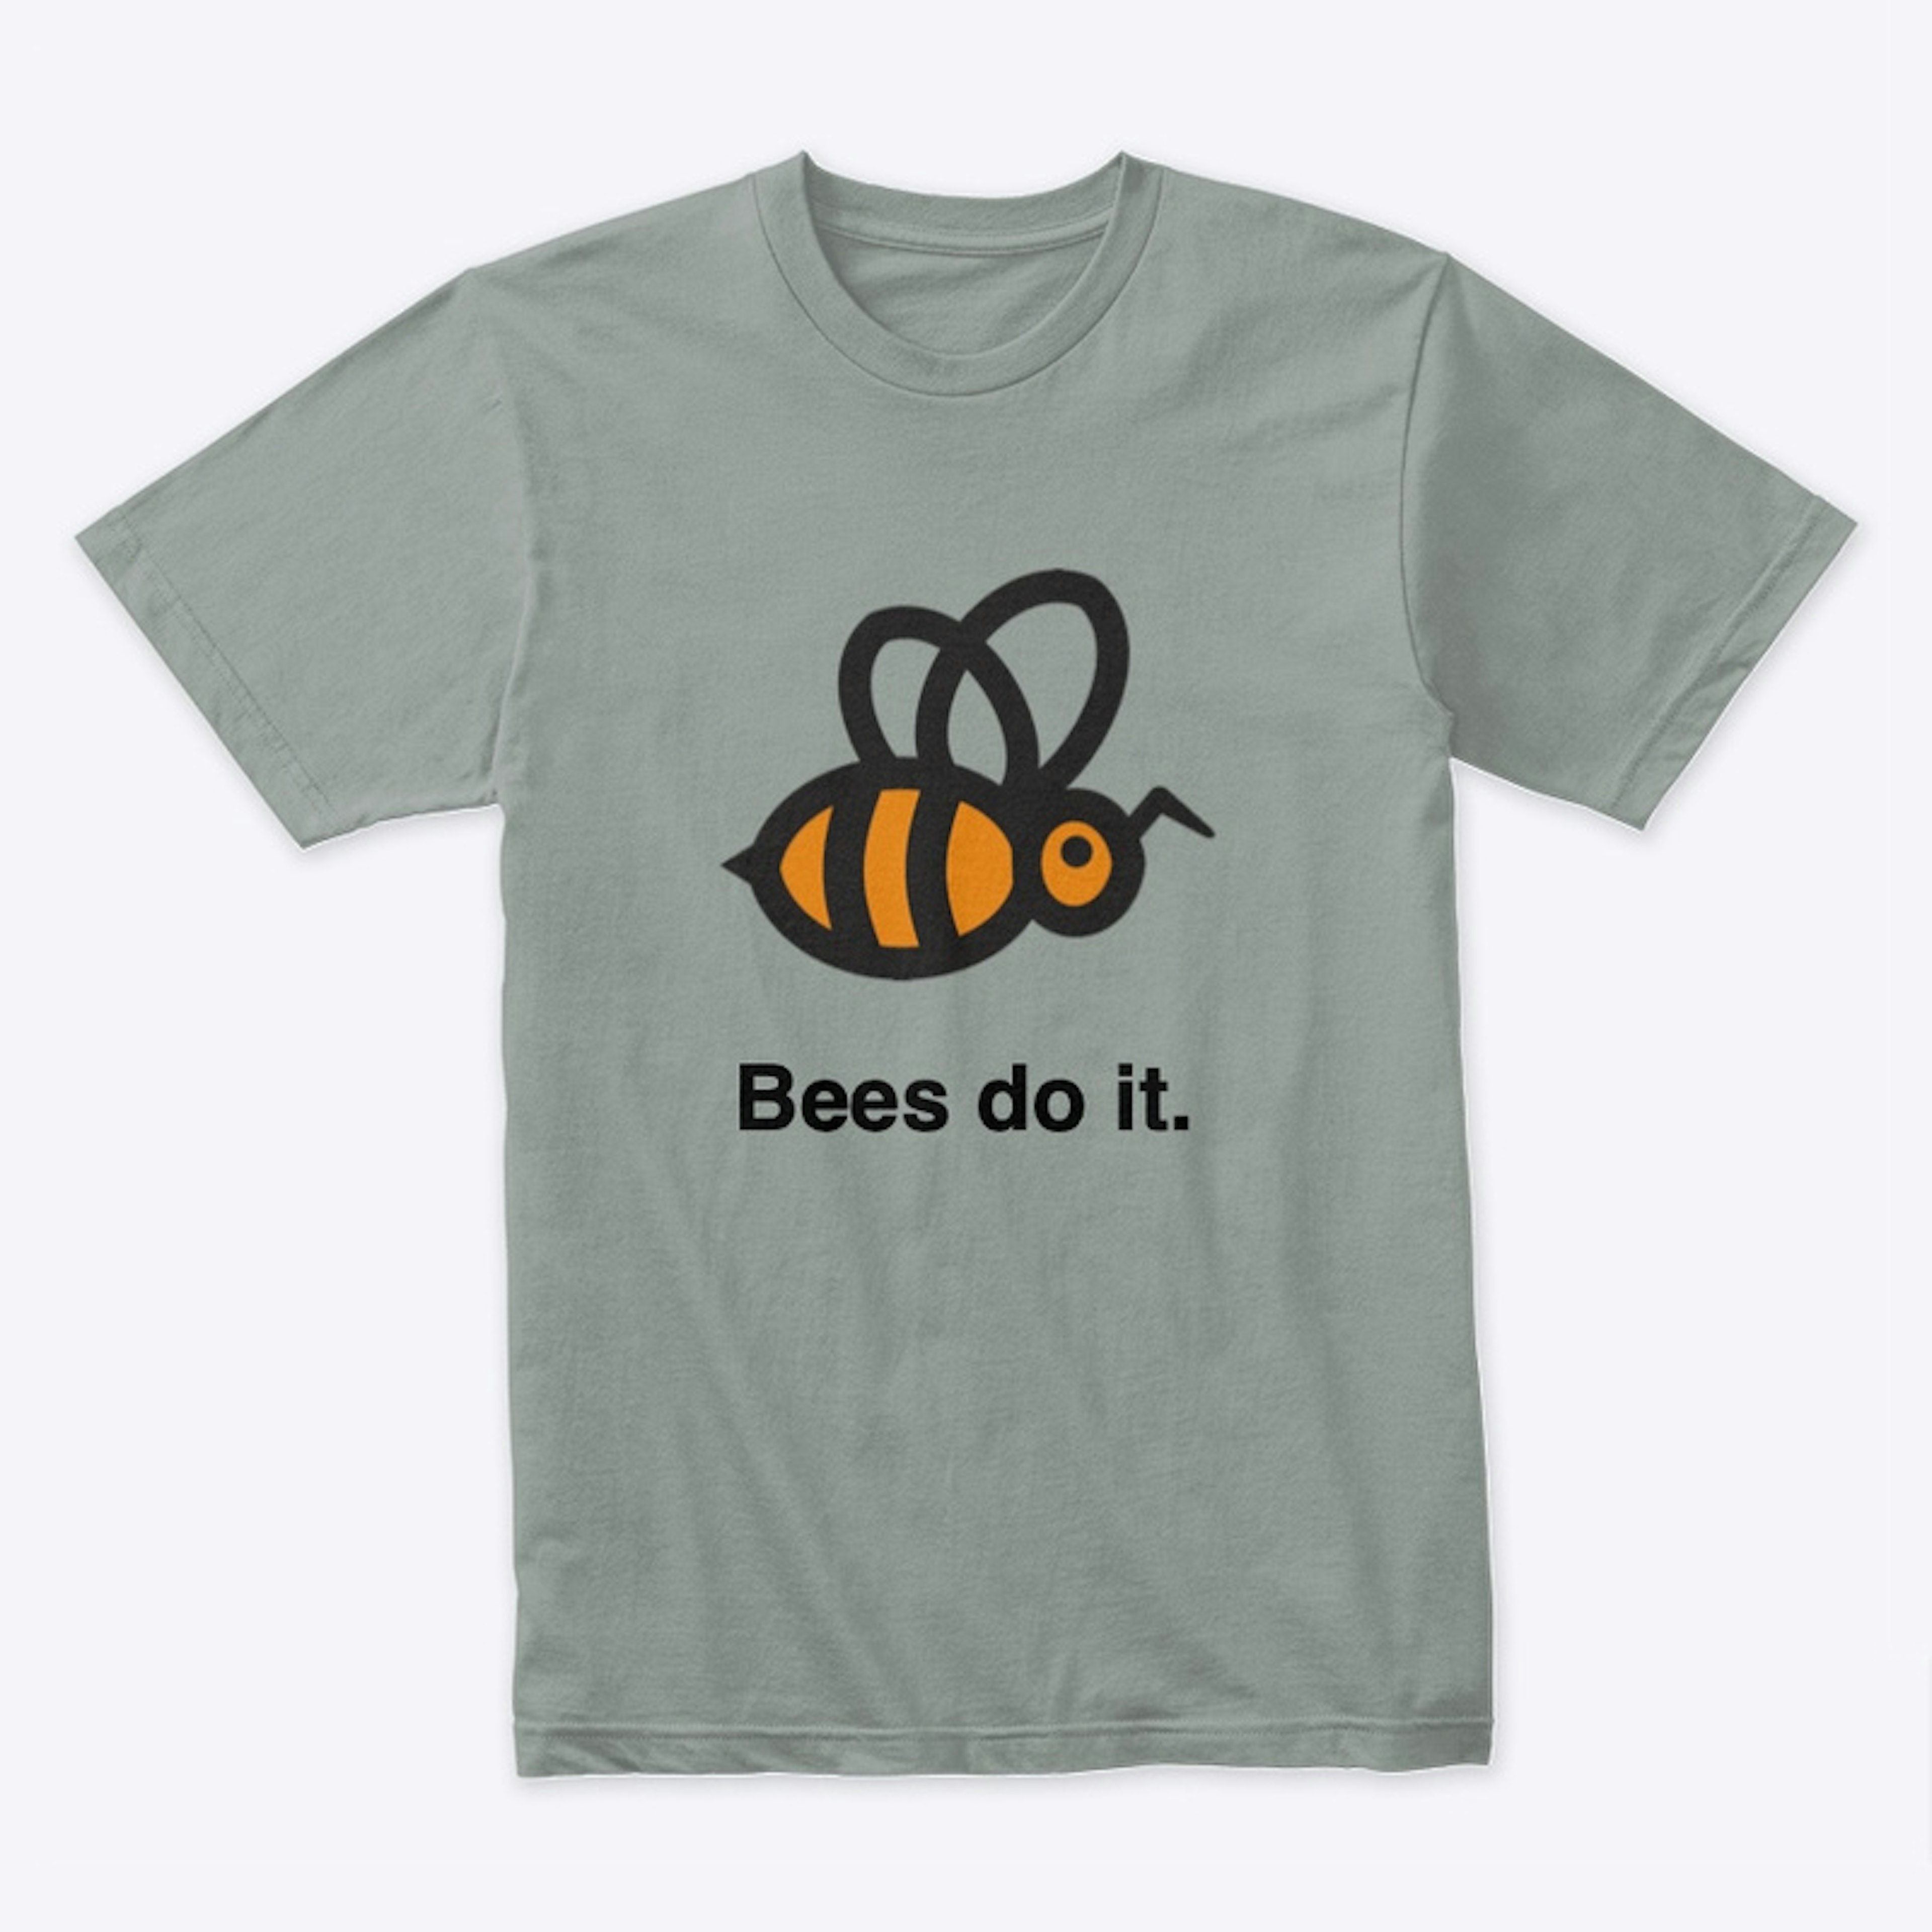 Premium T-shirt with Voting Bee